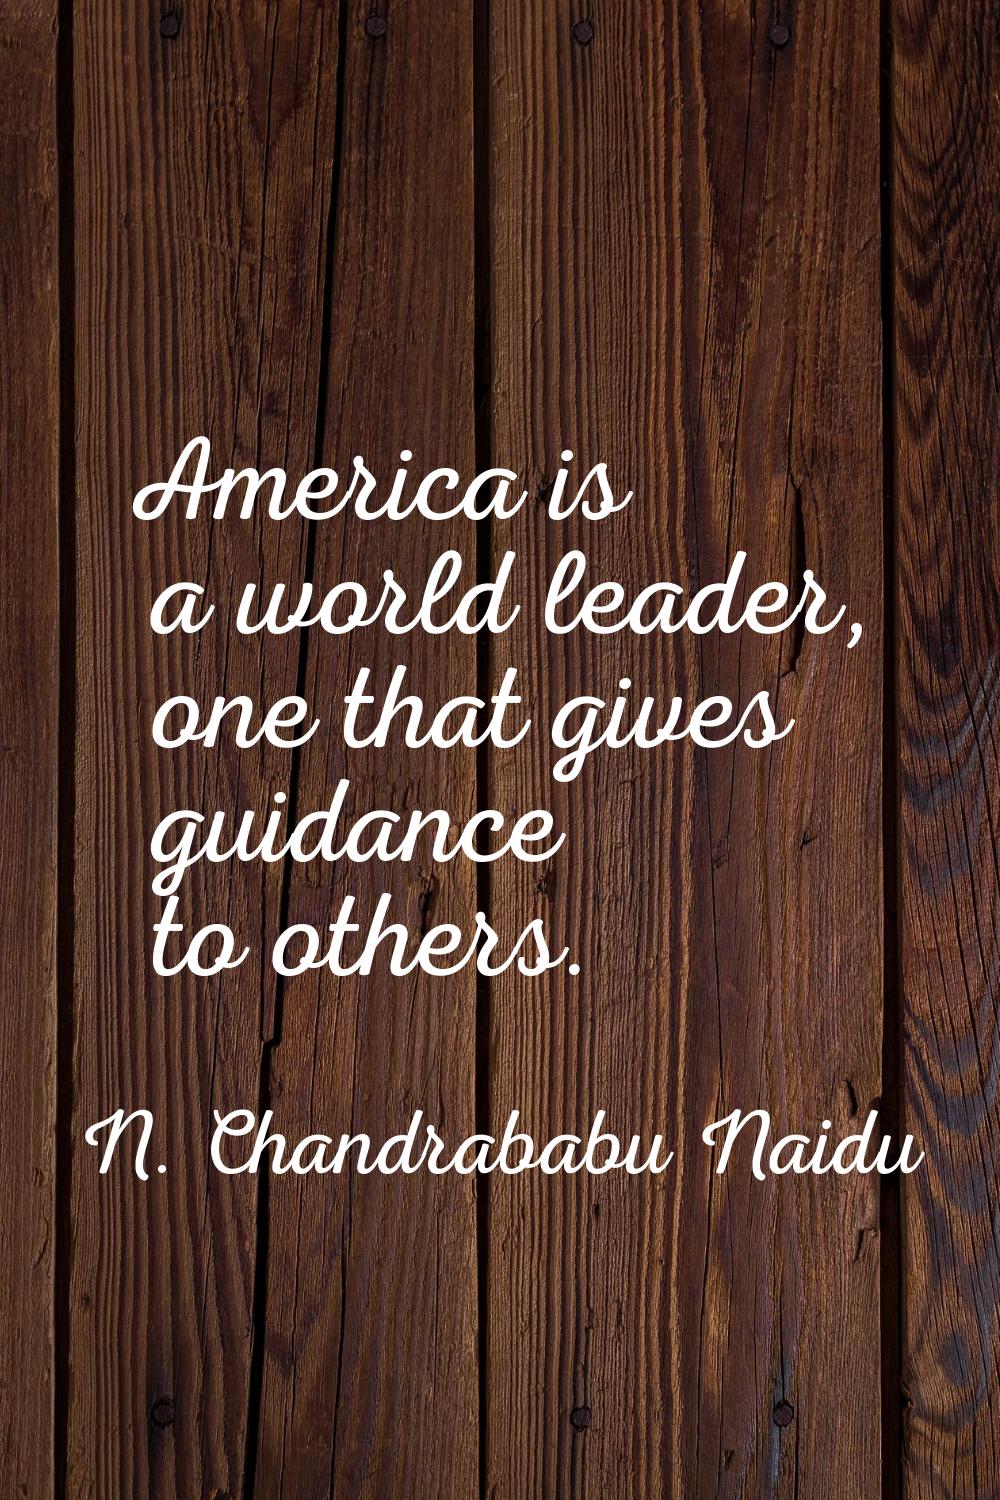 America is a world leader, one that gives guidance to others.